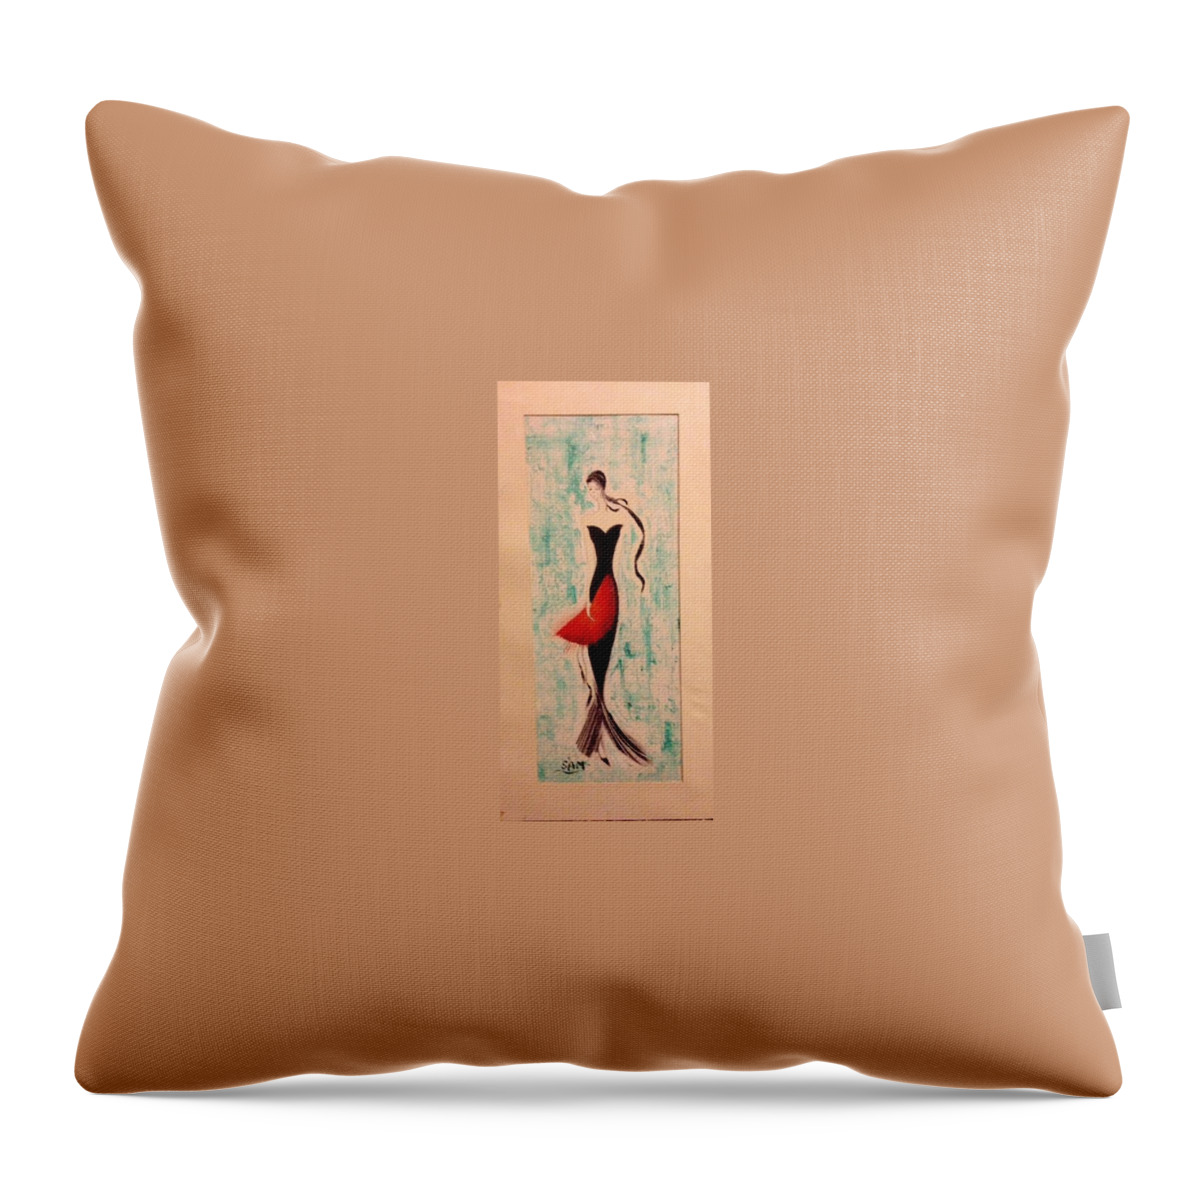 Oil Throw Pillow featuring the painting Elegance by Sam Shaker